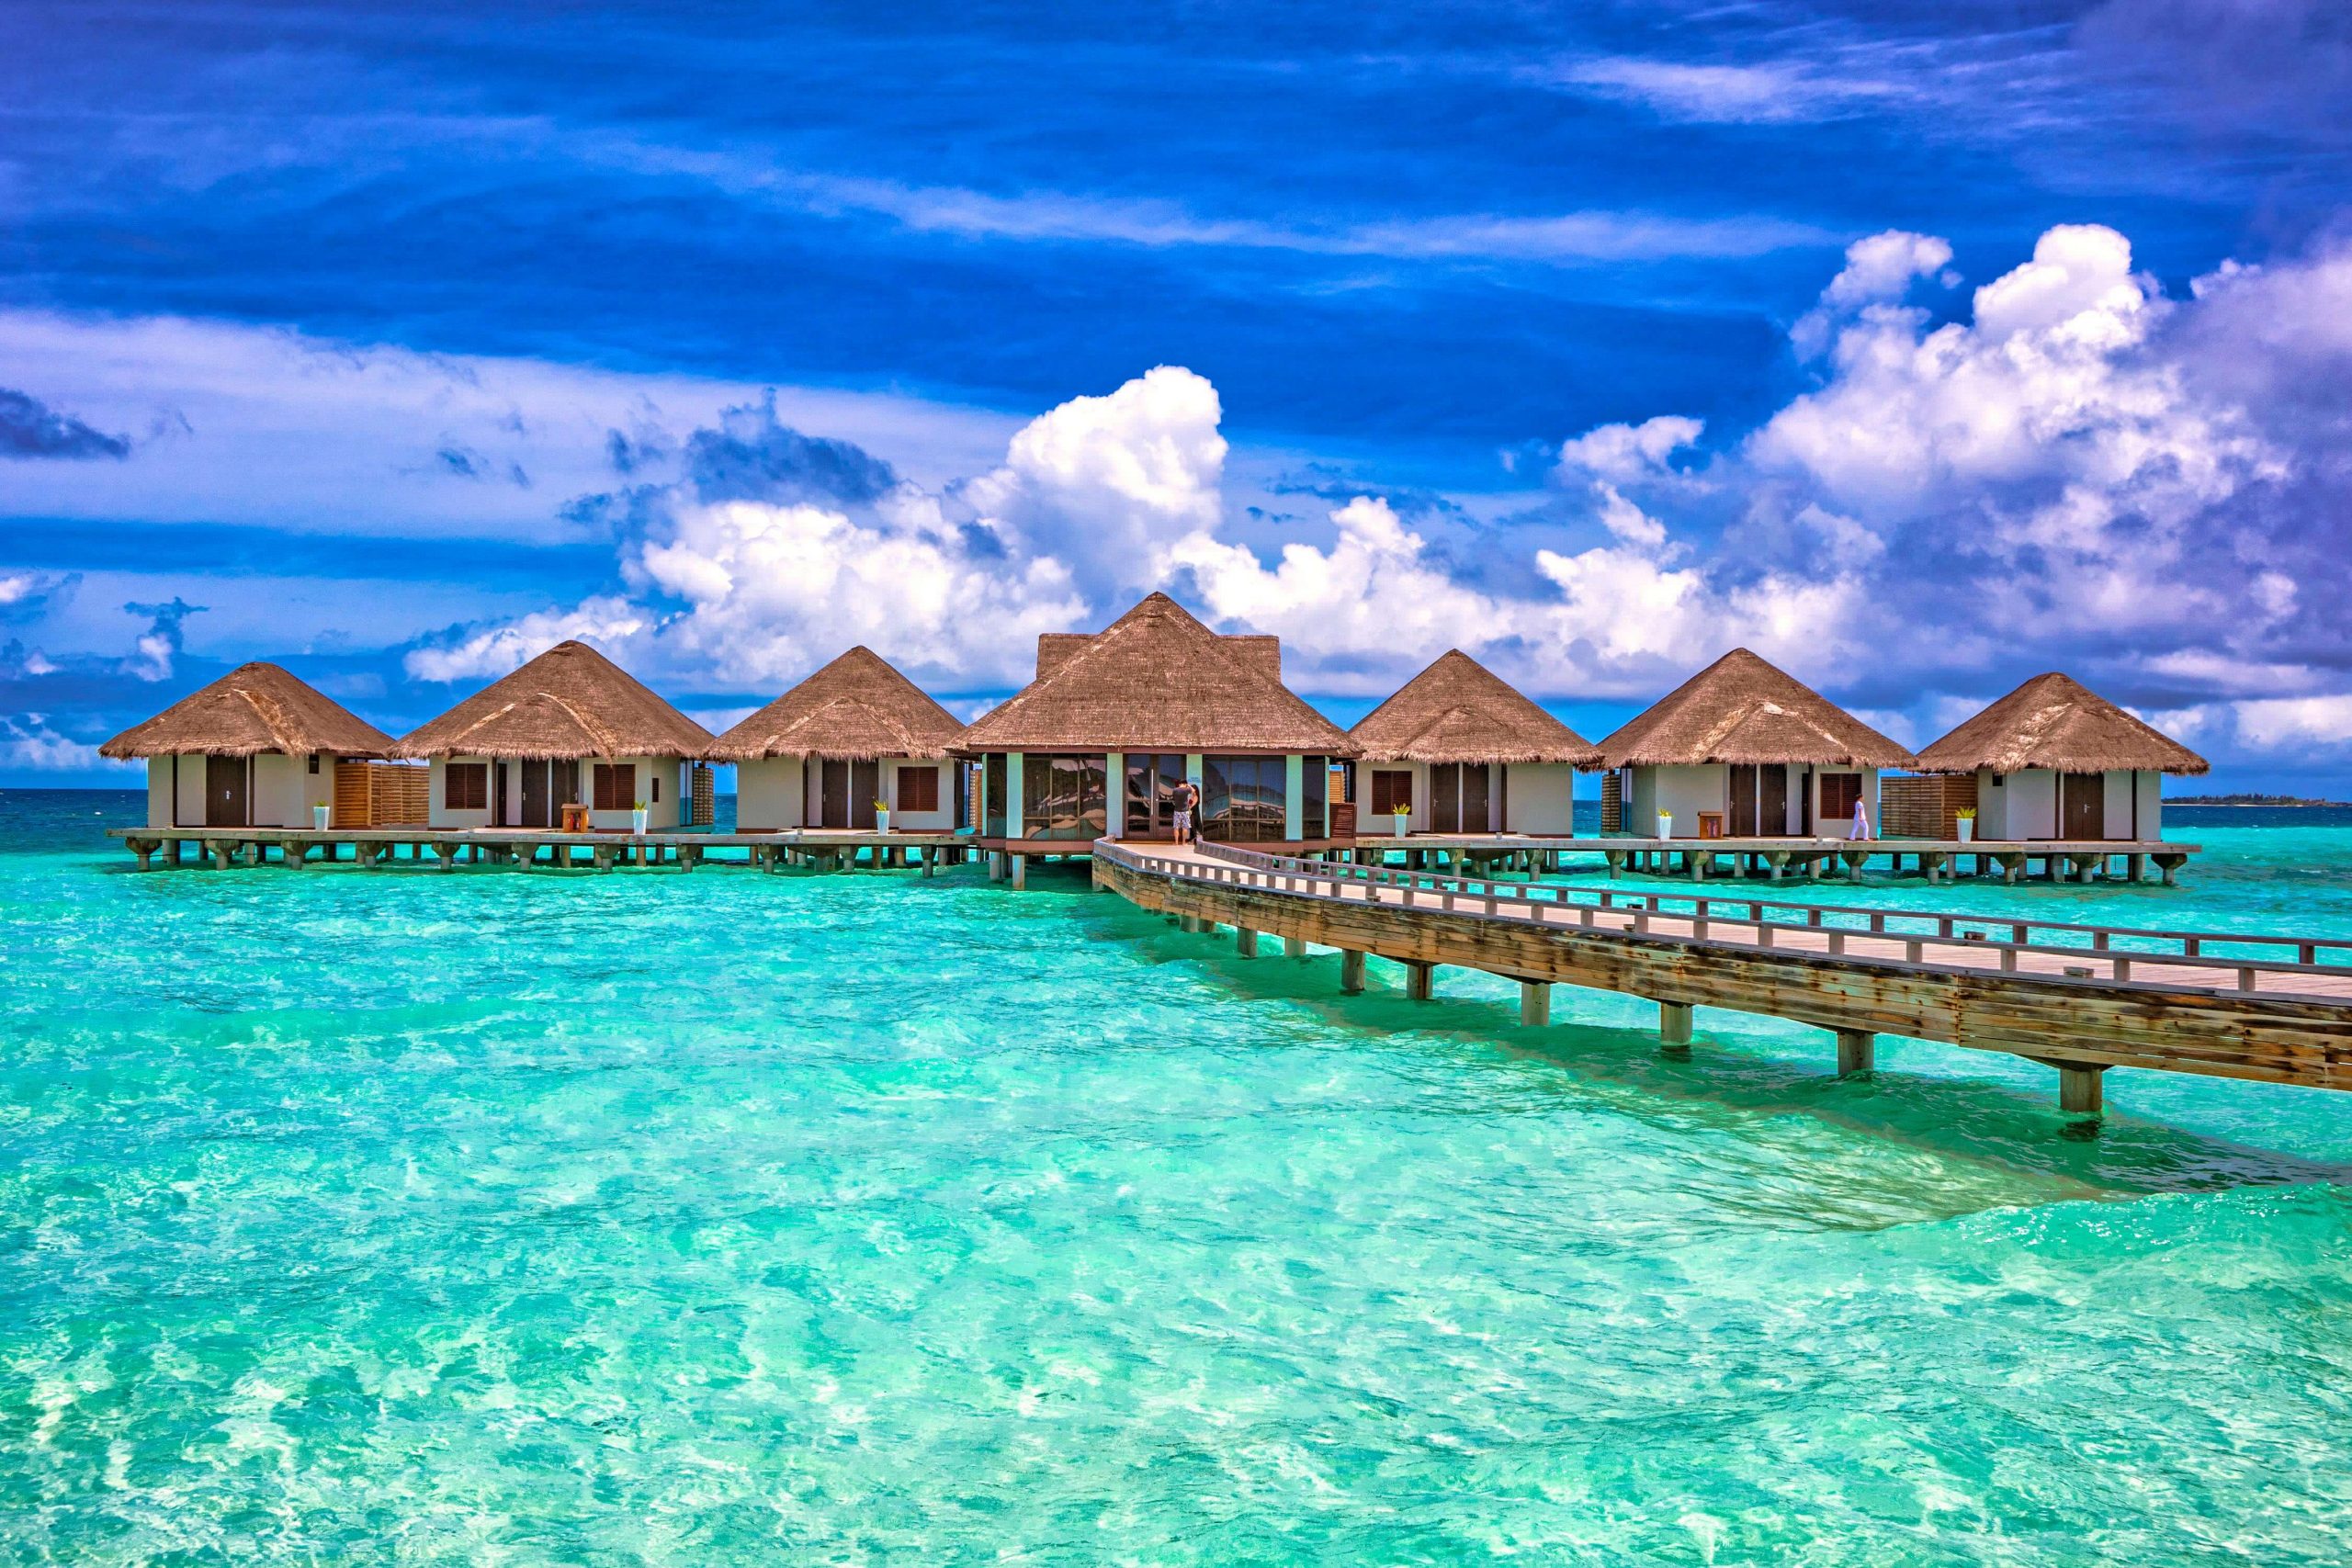 maldives tour package philippines 2022